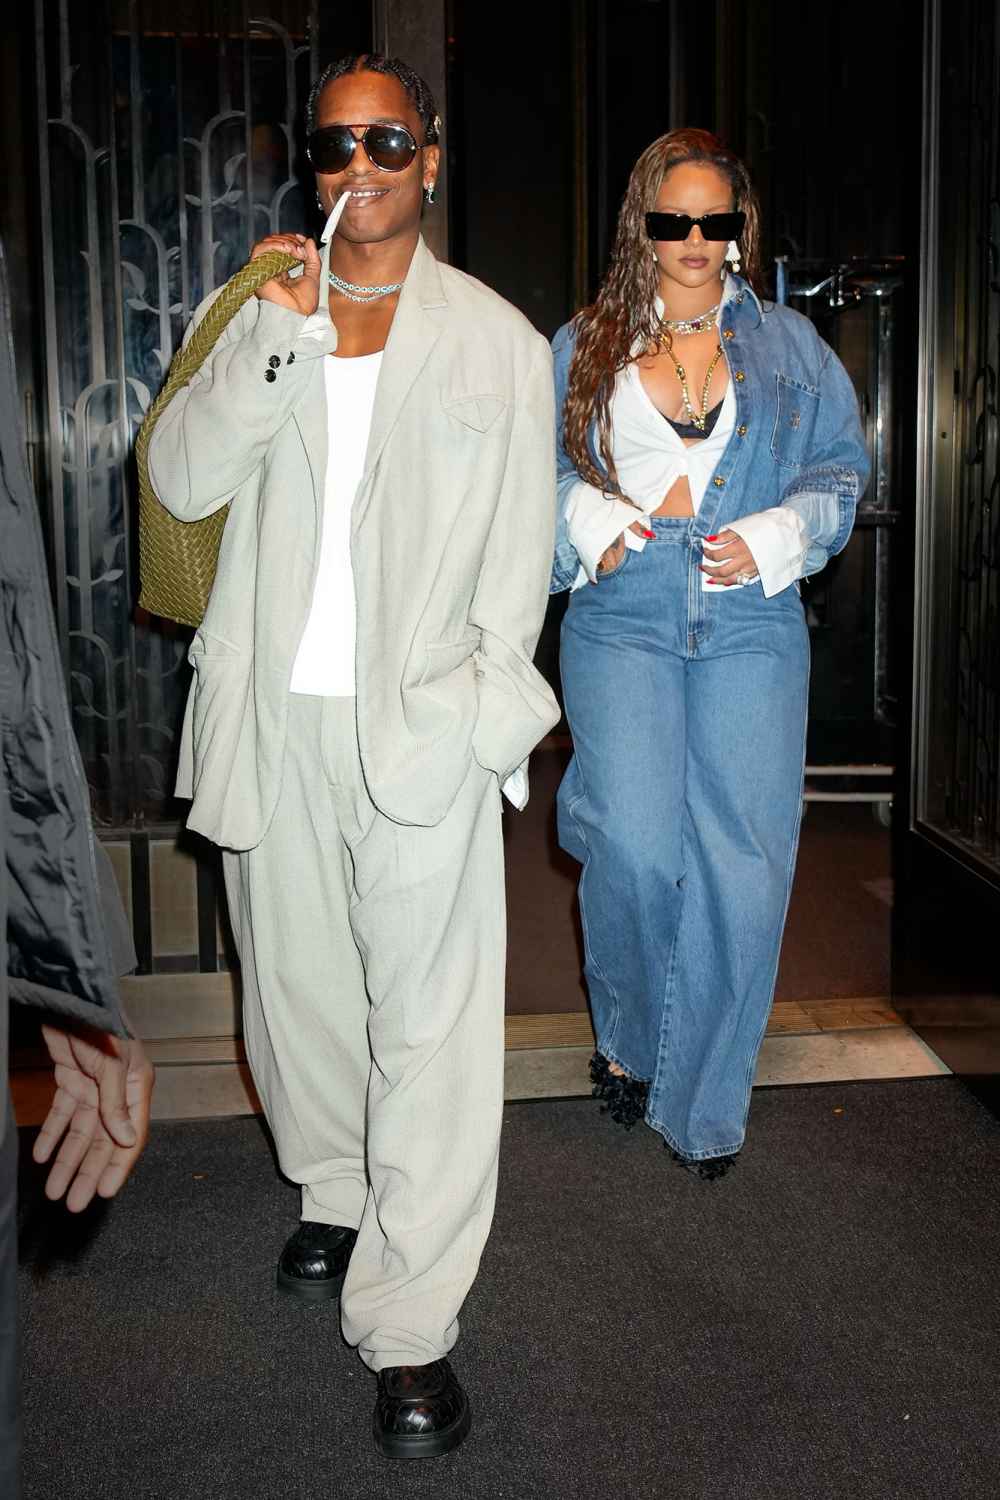 Rihanna Rocks Double Denim Like Only She Can During Date Night With Boyfriend ASAP Rocky